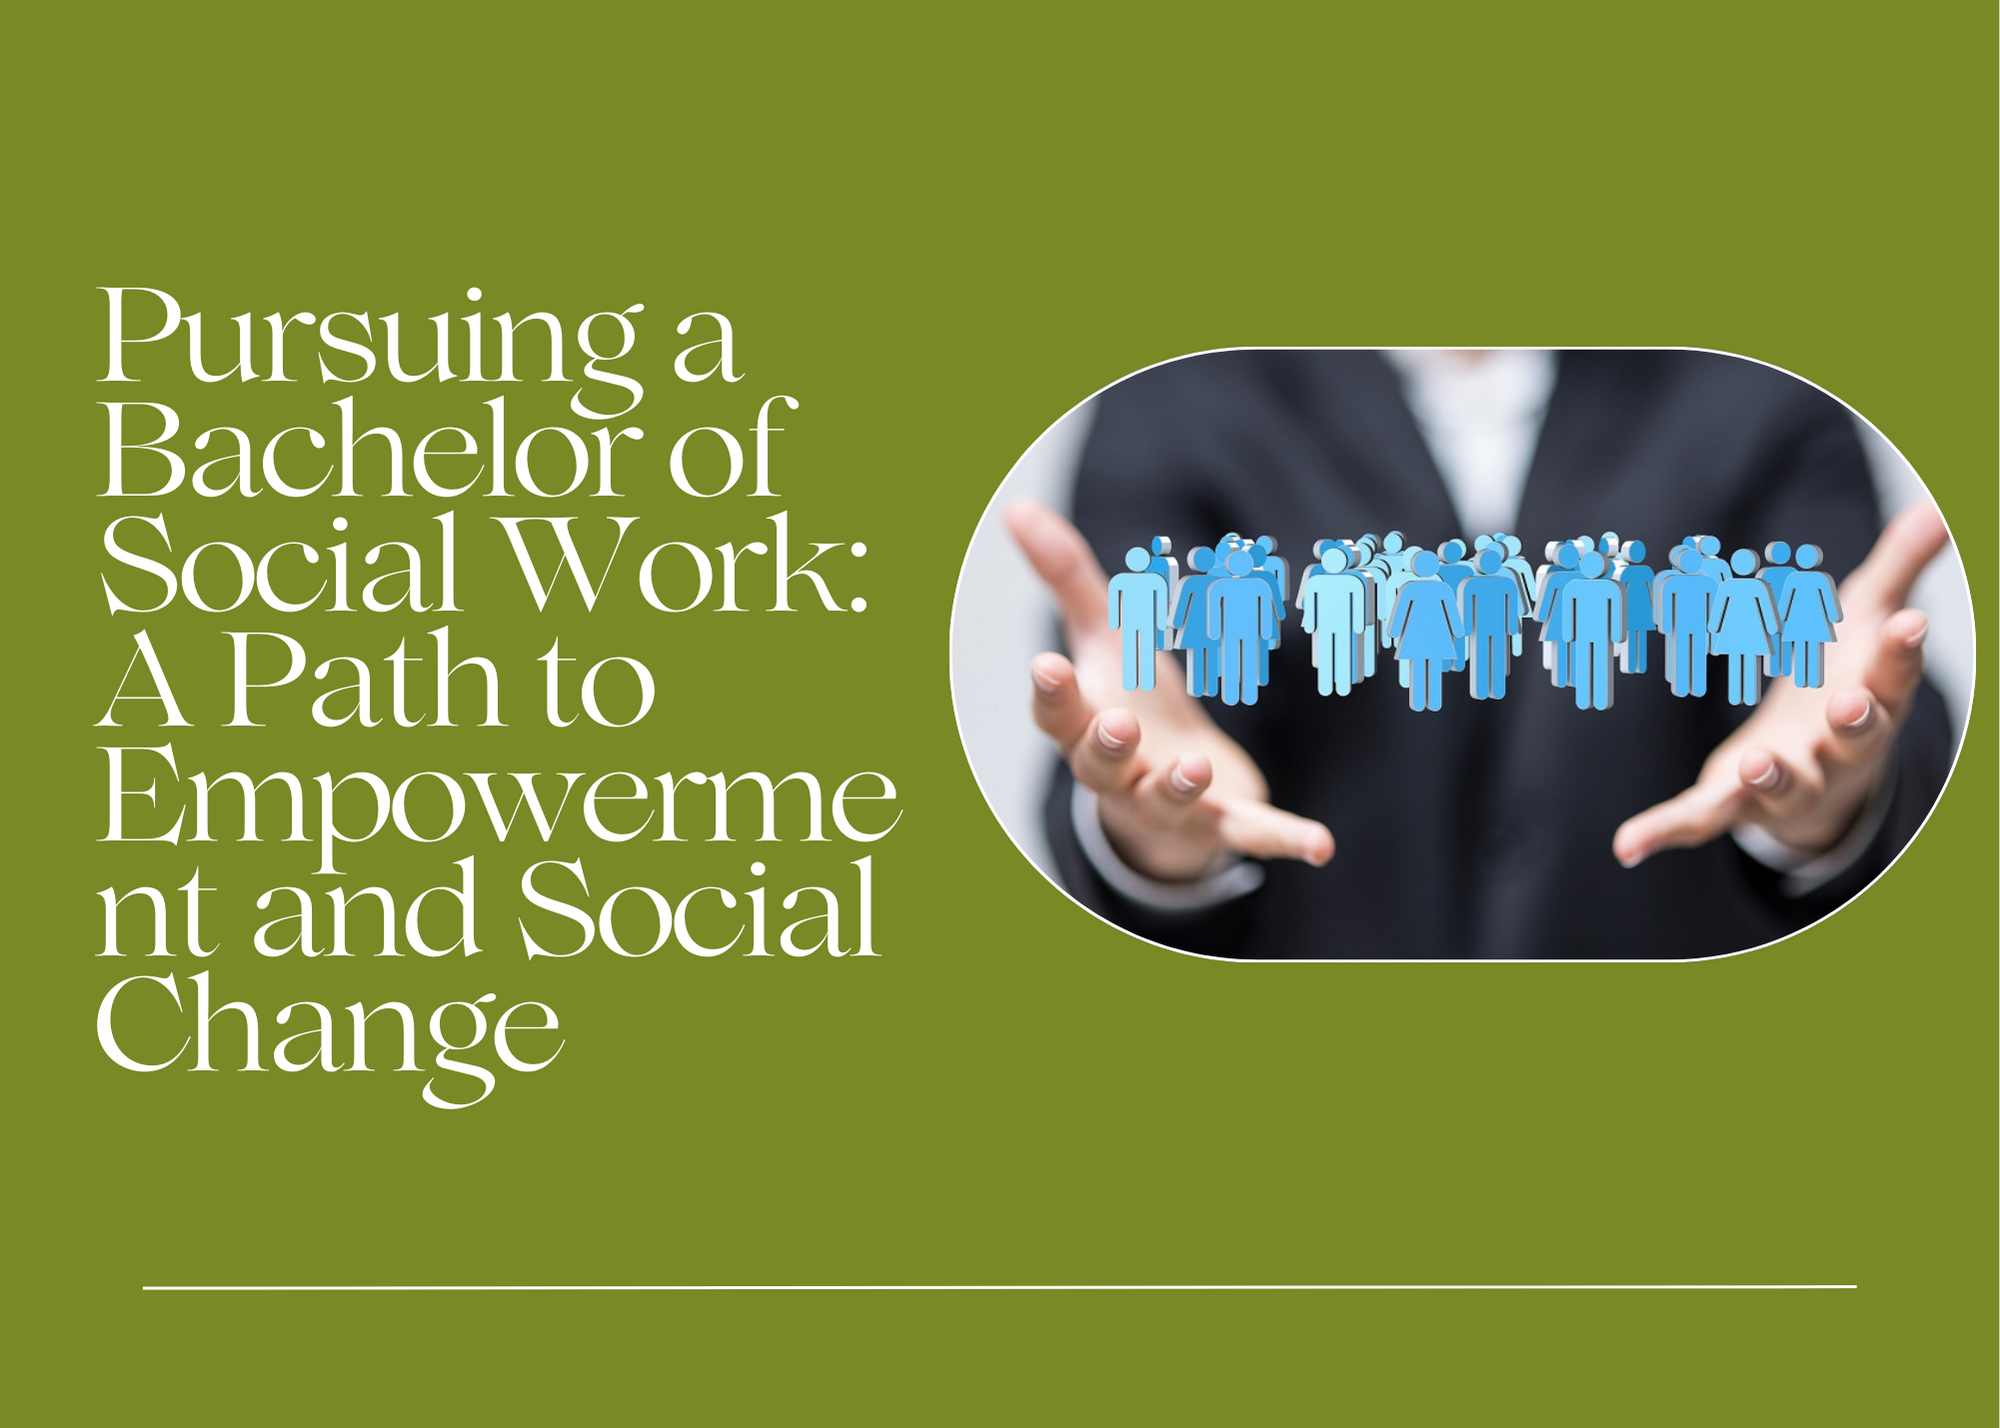 Pursuing a Bachelor of Social Work: A Path to Empowerment and Social Change